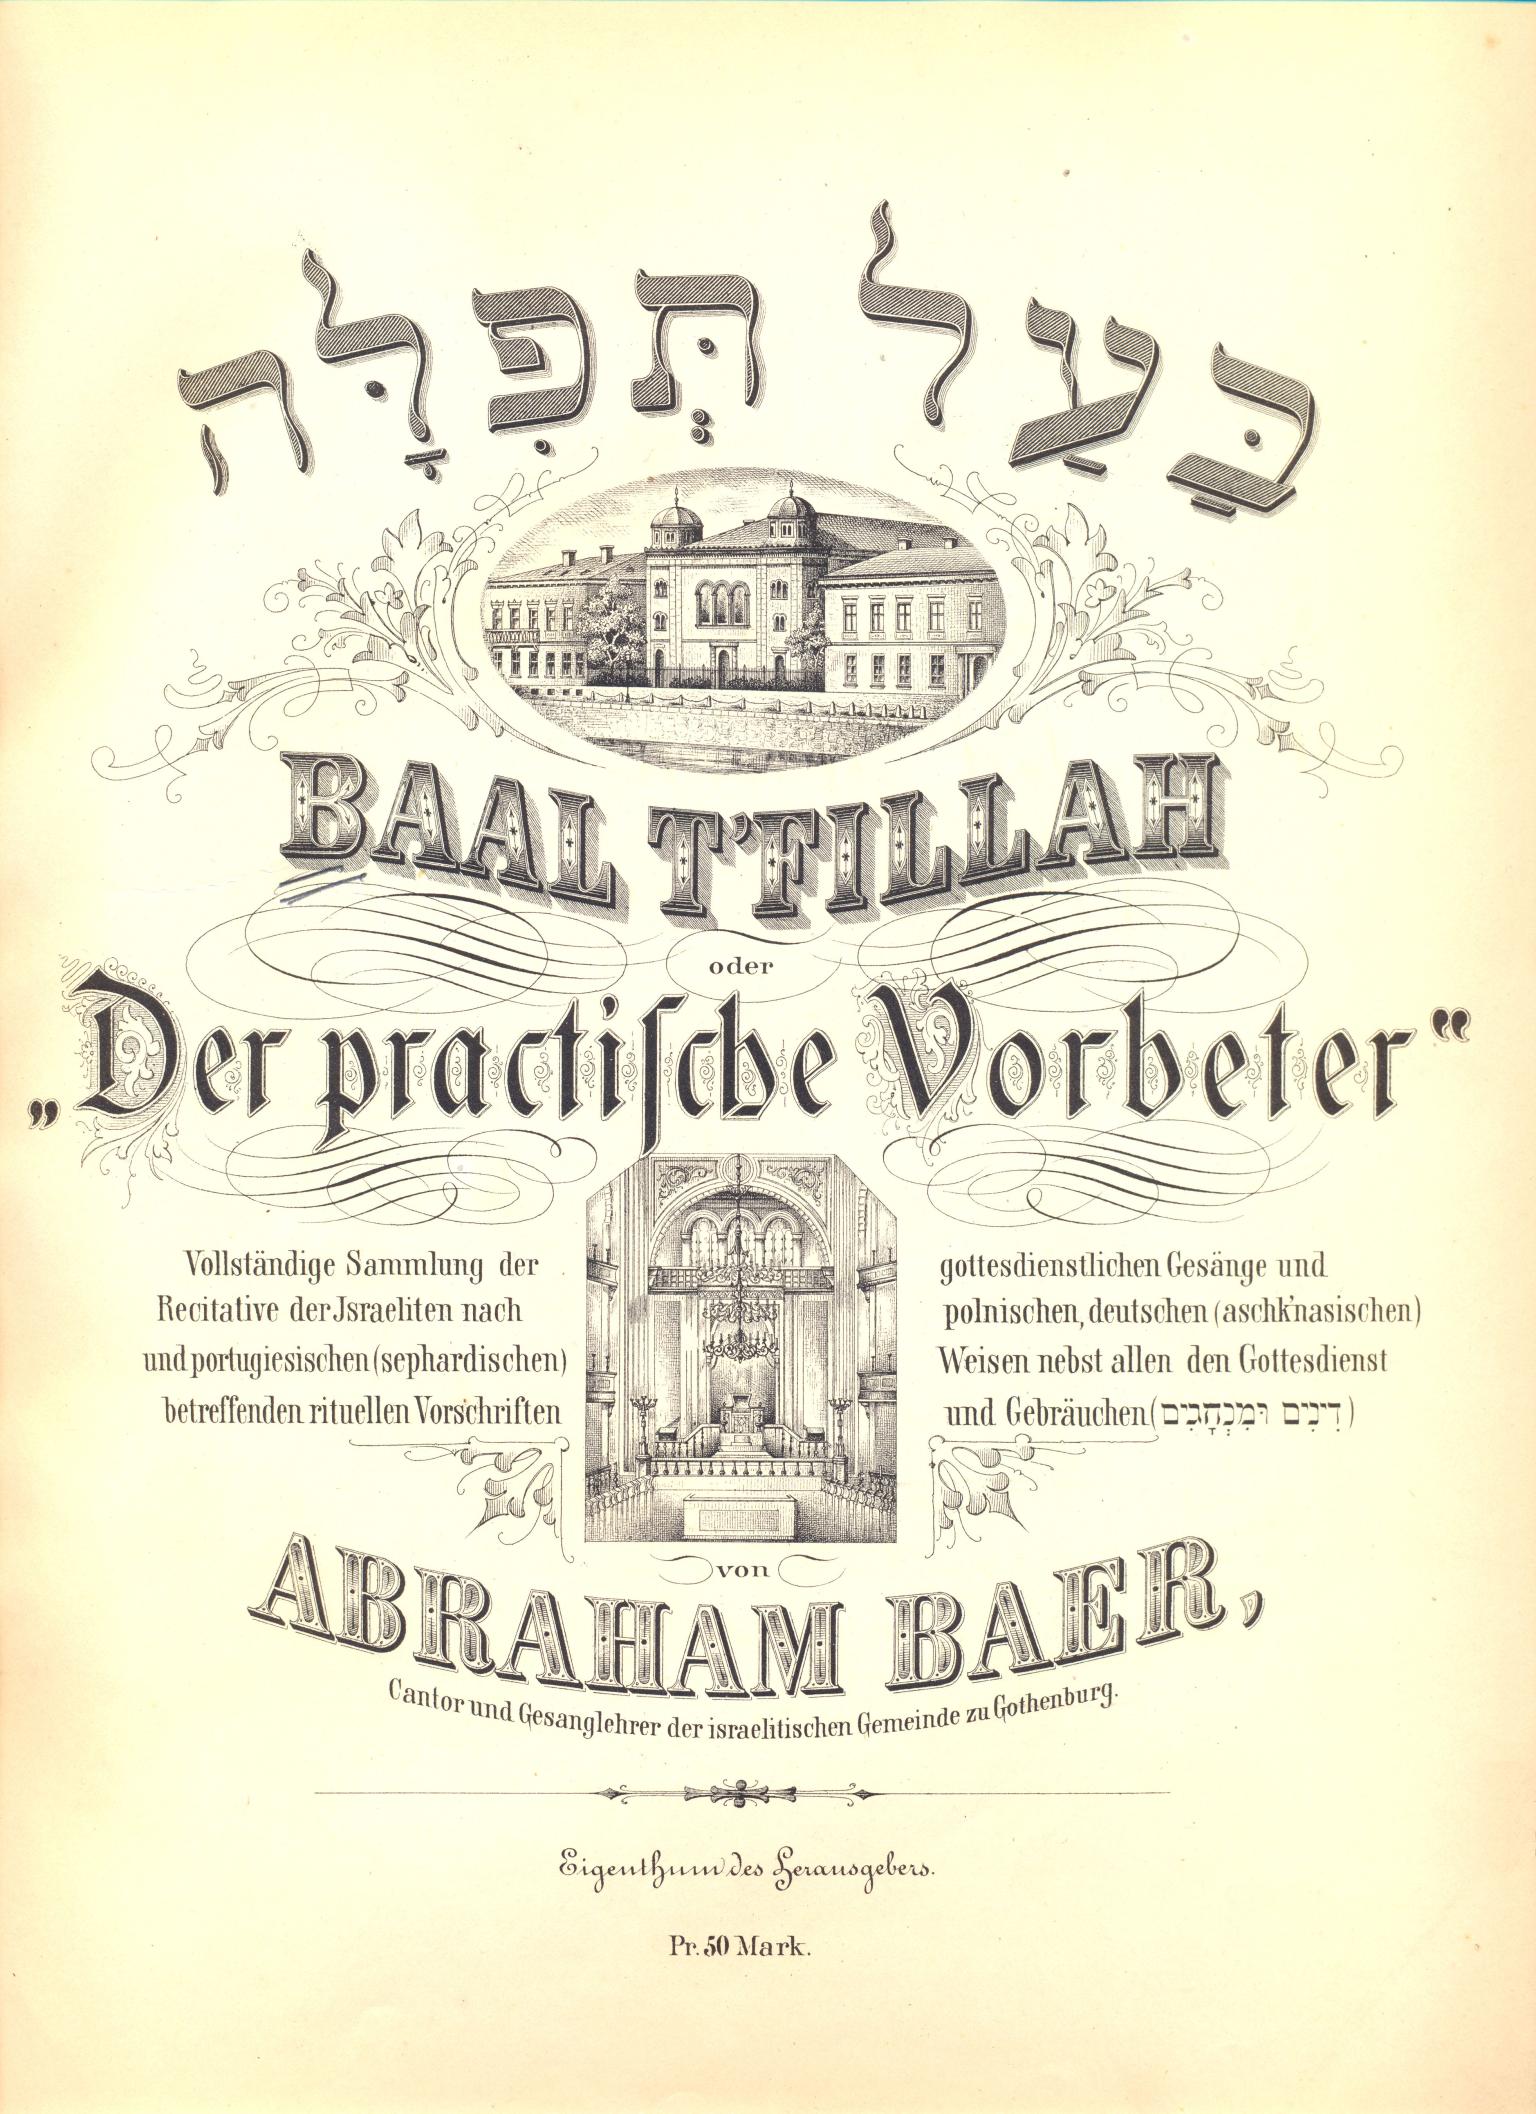 Printed page featuring Hebrew and German text and small images of the exterior of a building and interior of synagogue. 